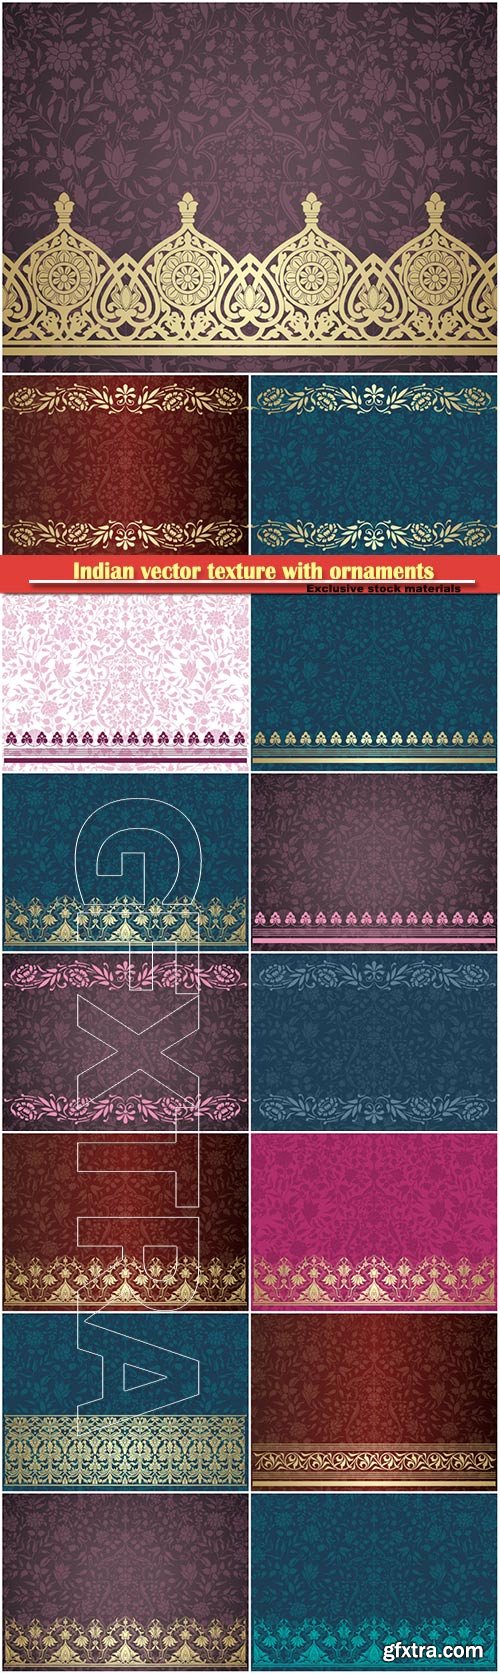 Indian vector texture with beautiful ornaments